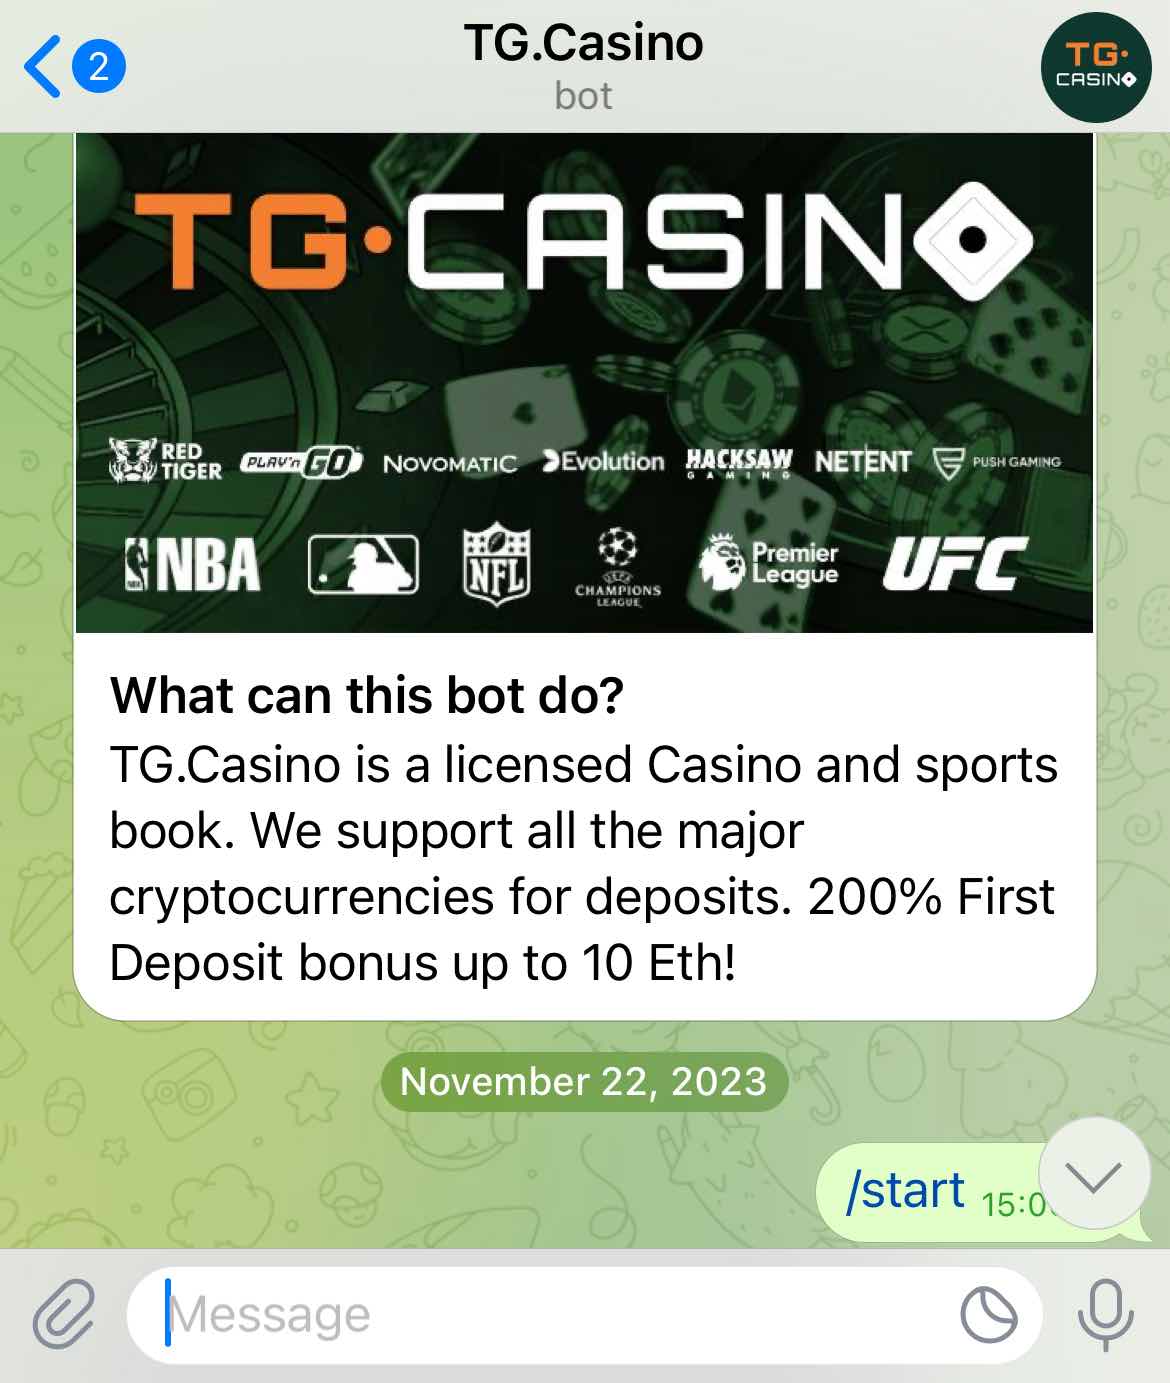 A screenshot of the beginning of the registration step for the betting site TG Casino